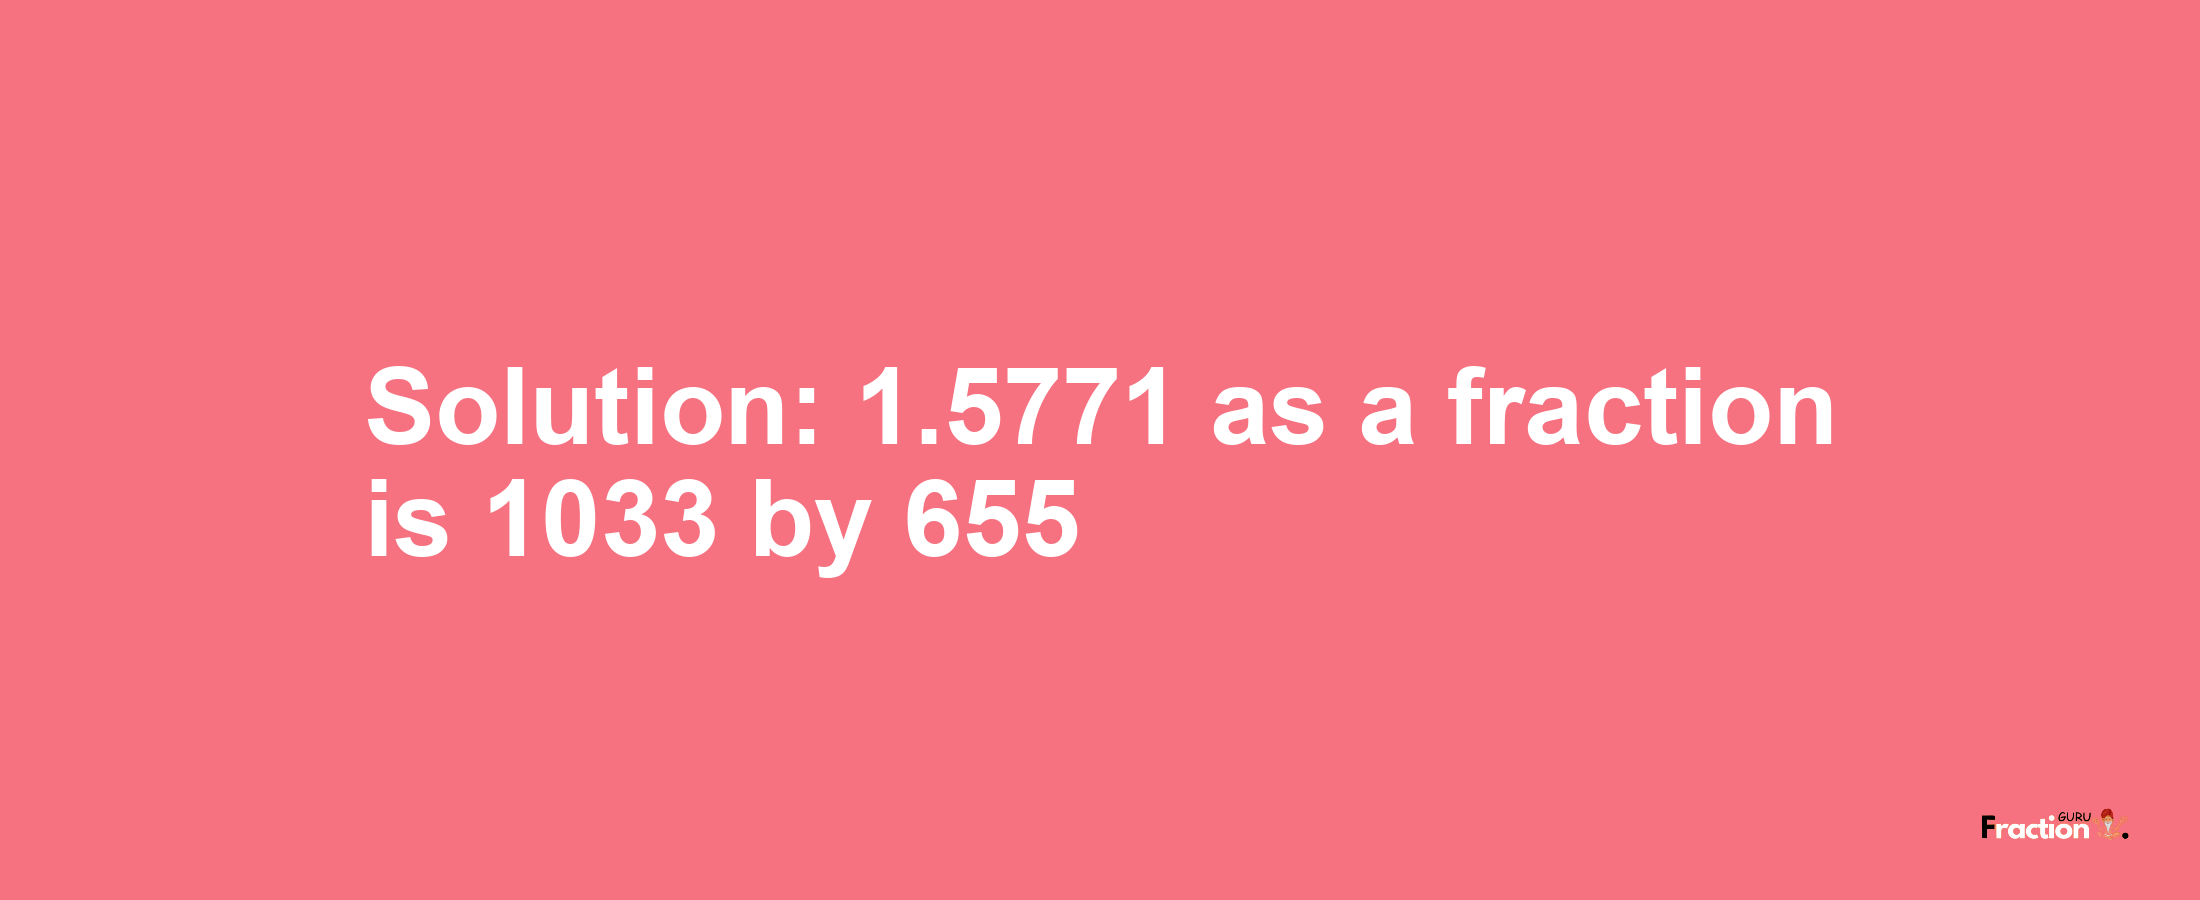 Solution:1.5771 as a fraction is 1033/655